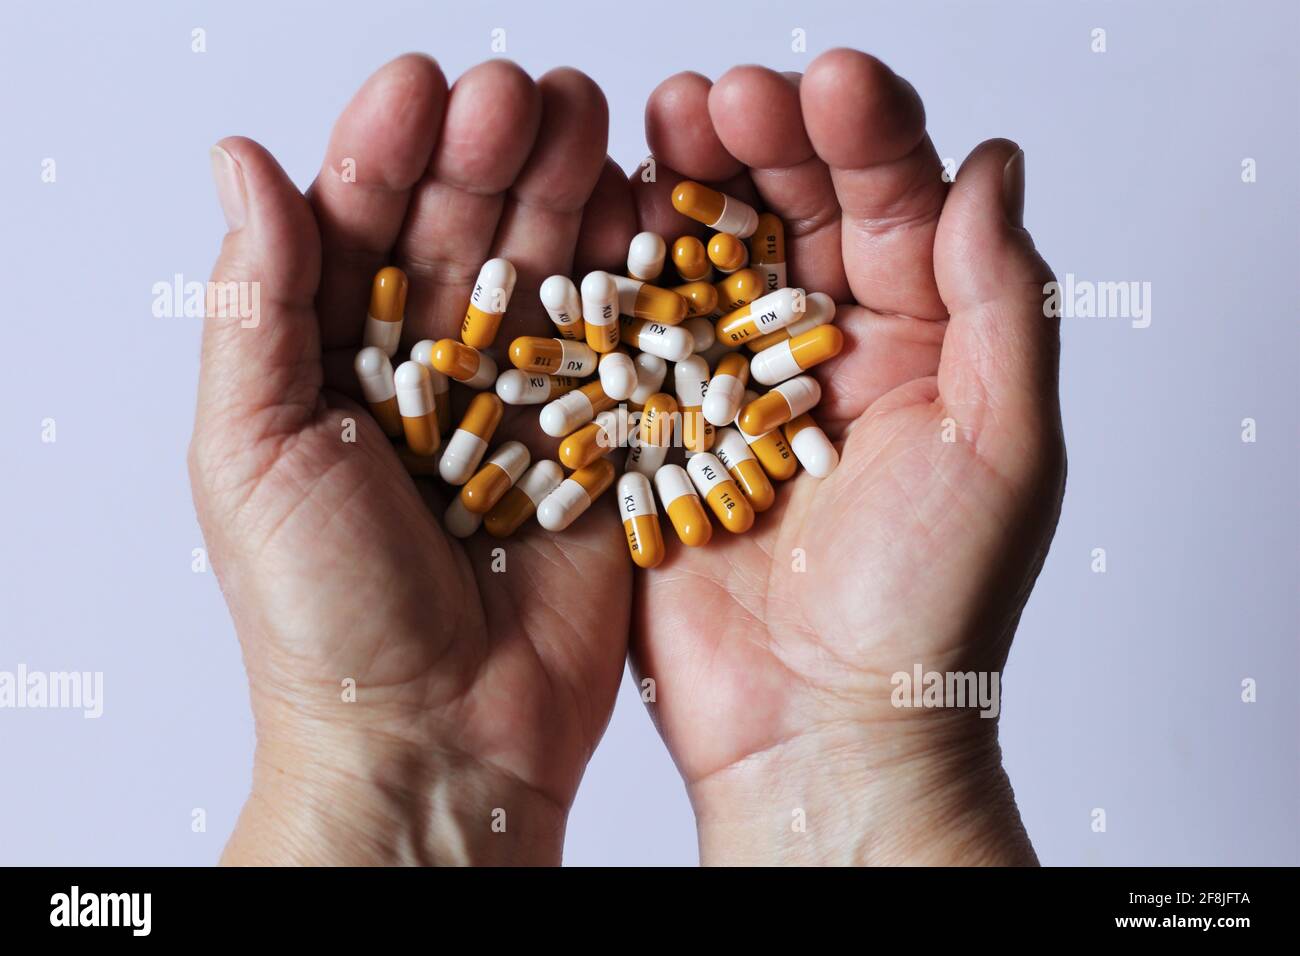 Hand with pills of omeprazole medication for treatment of GERD peptic ulcer & Zollinger Ellison syndrome. Used to treat stomach and esophagus problems Stock Photo